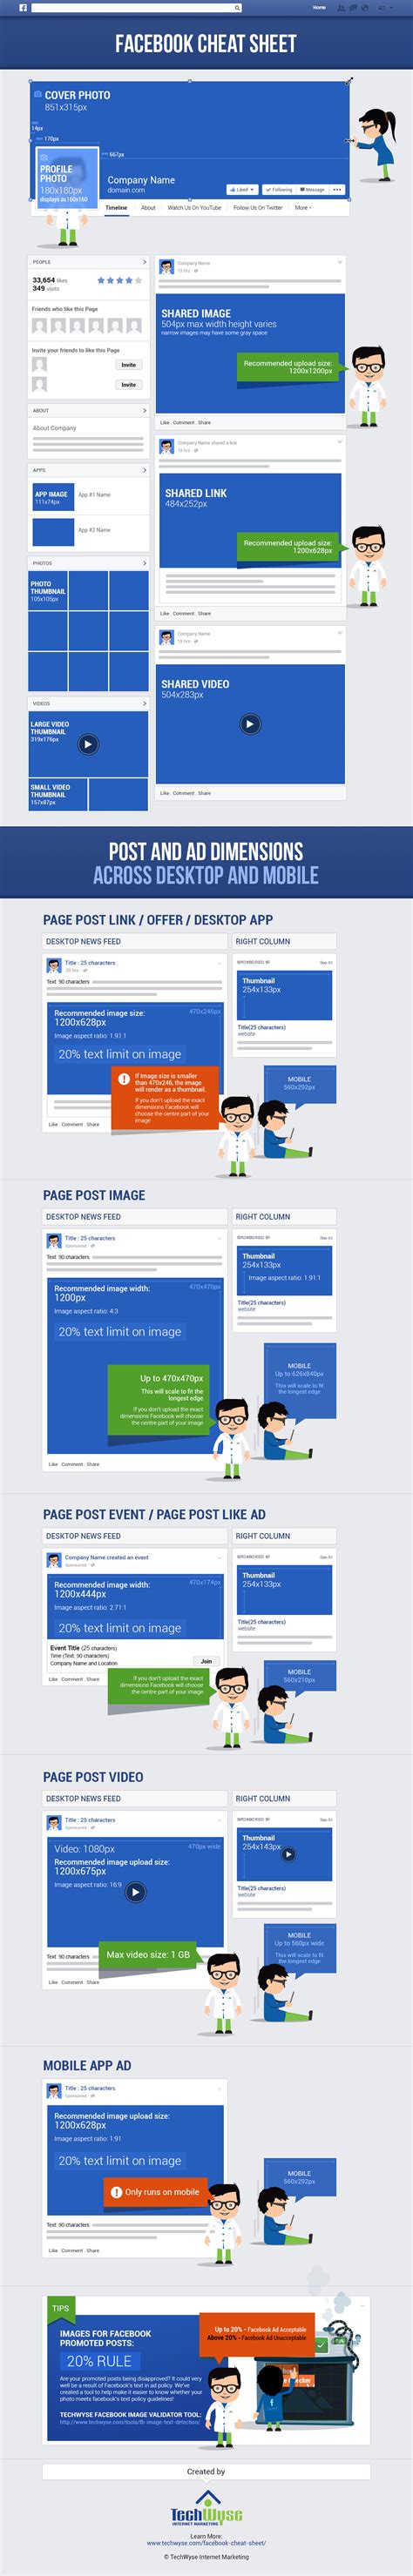 Facebook Cheat Sheet Image Size And Dimensions Updated Infographic